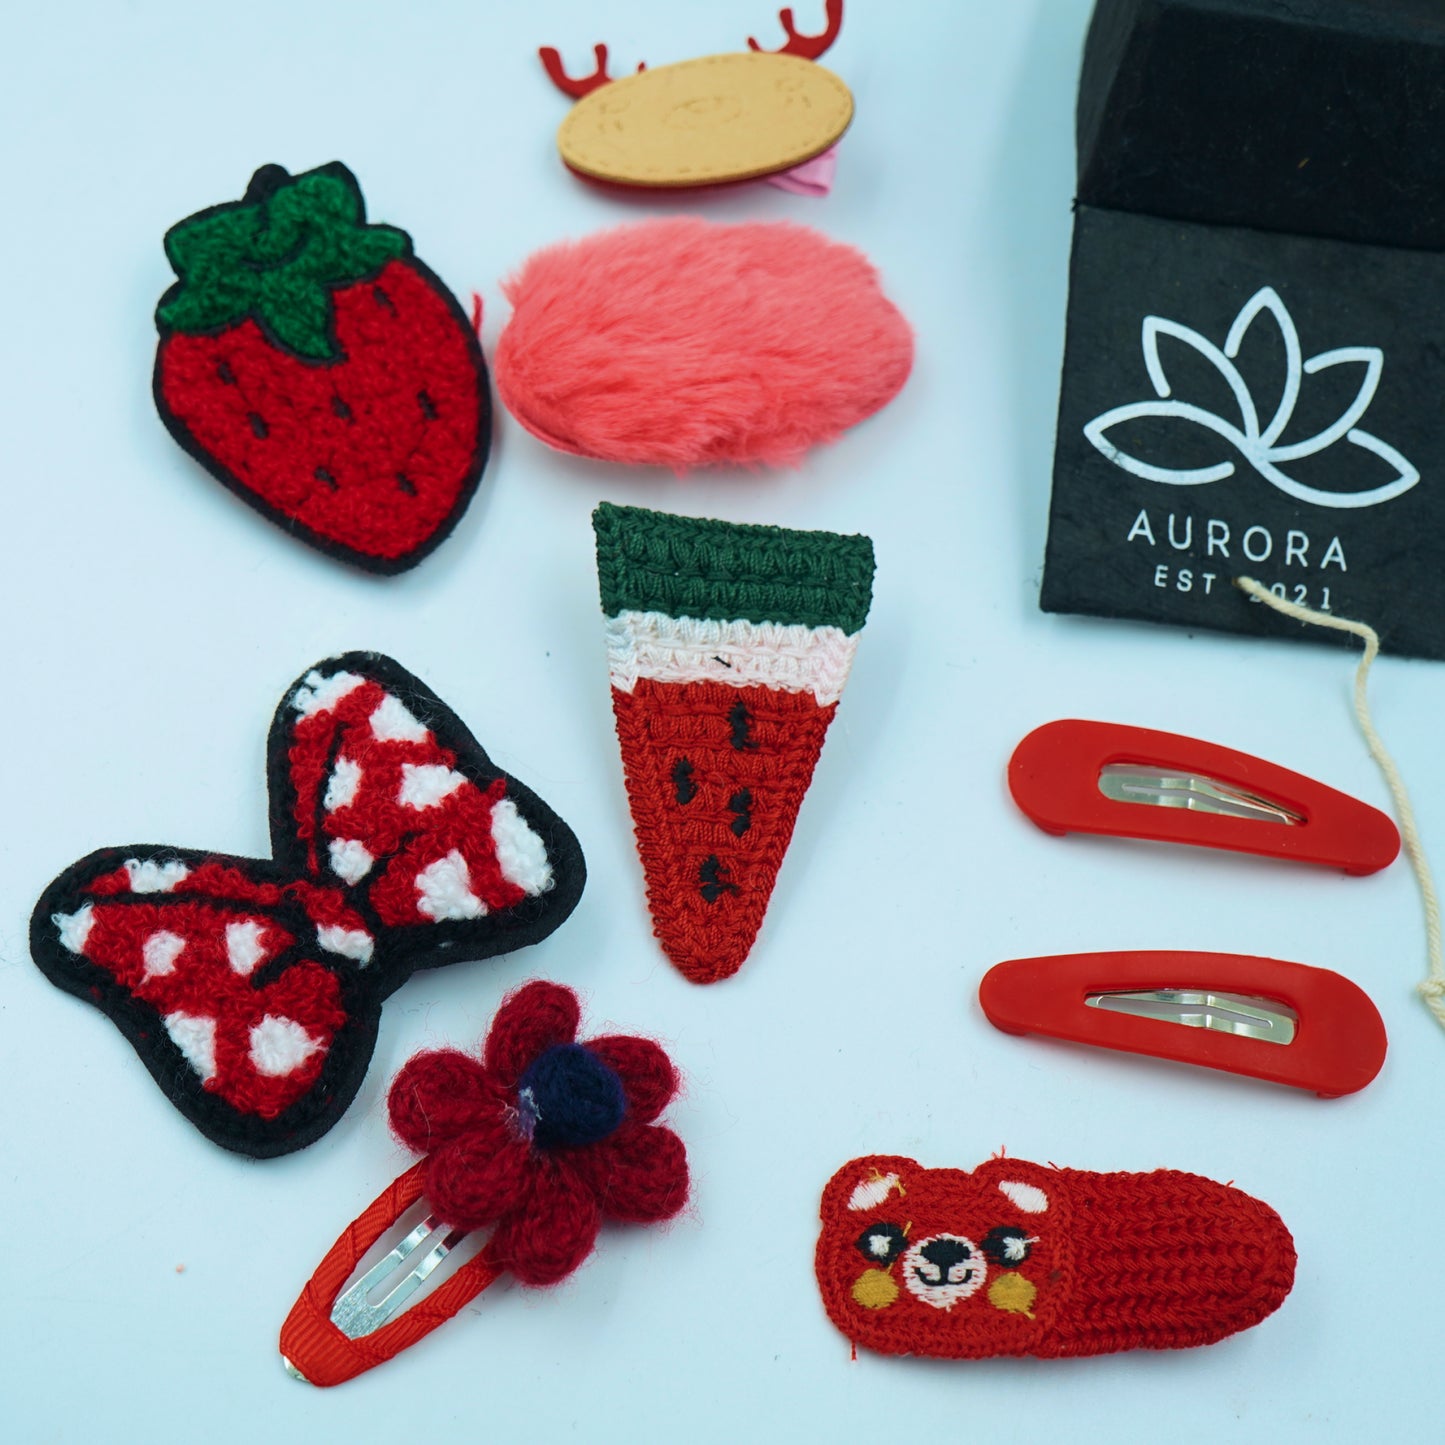 Buy Aurora Kids Hair Clips Collection | Fruits Design | 10 pcs in 1 packet | B37